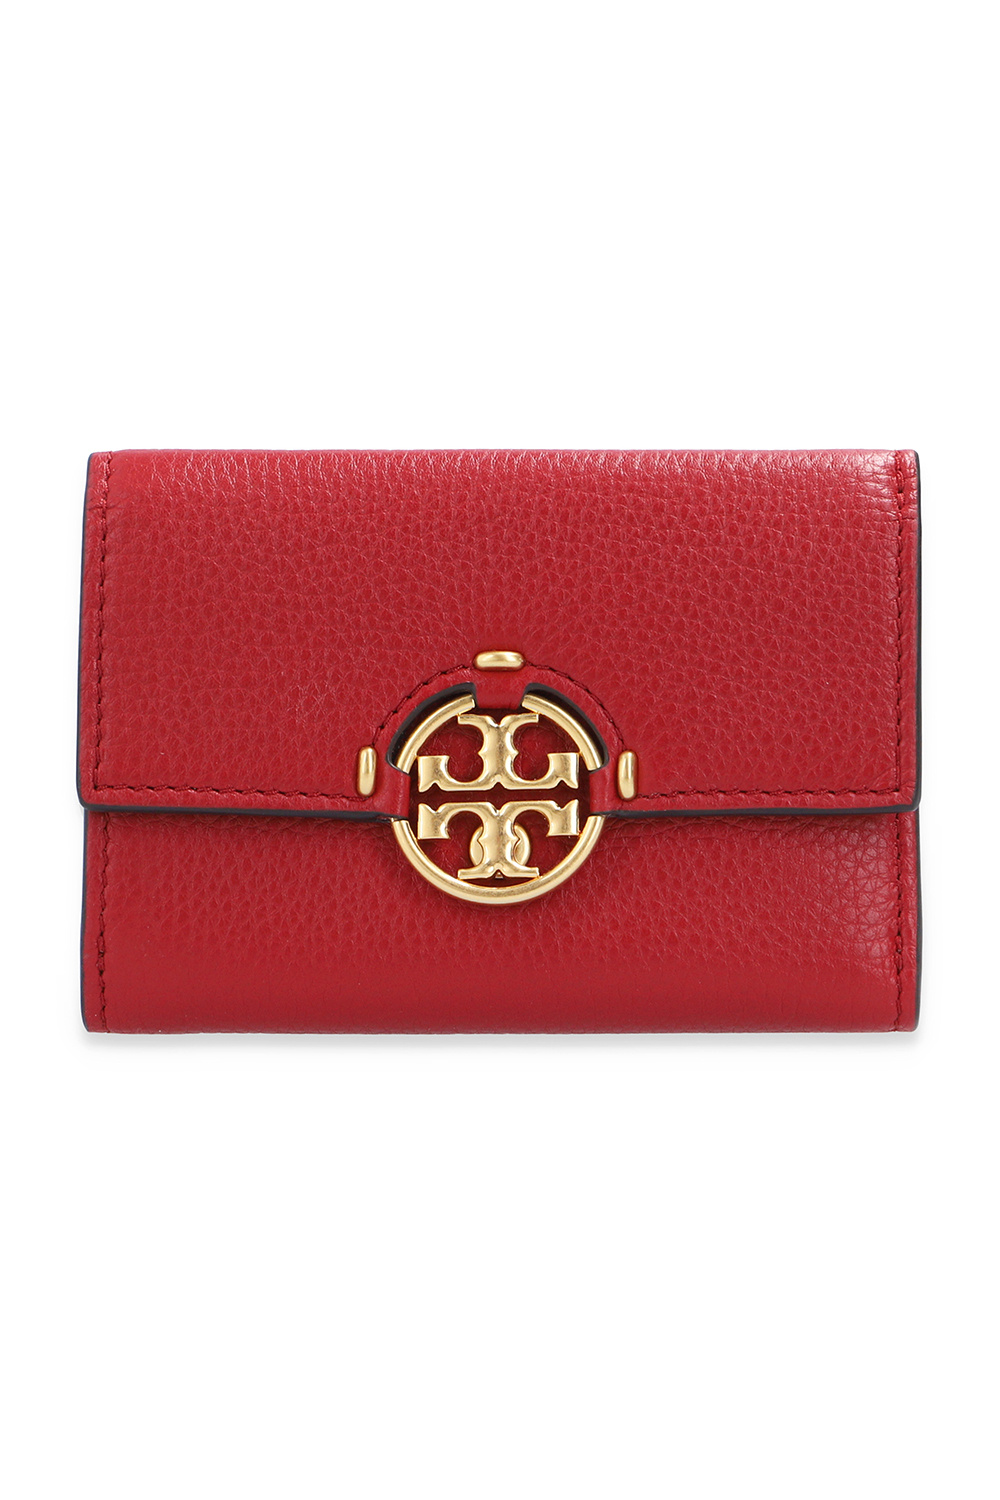 Red Wallet with logo Tory Burch - Vitkac TW